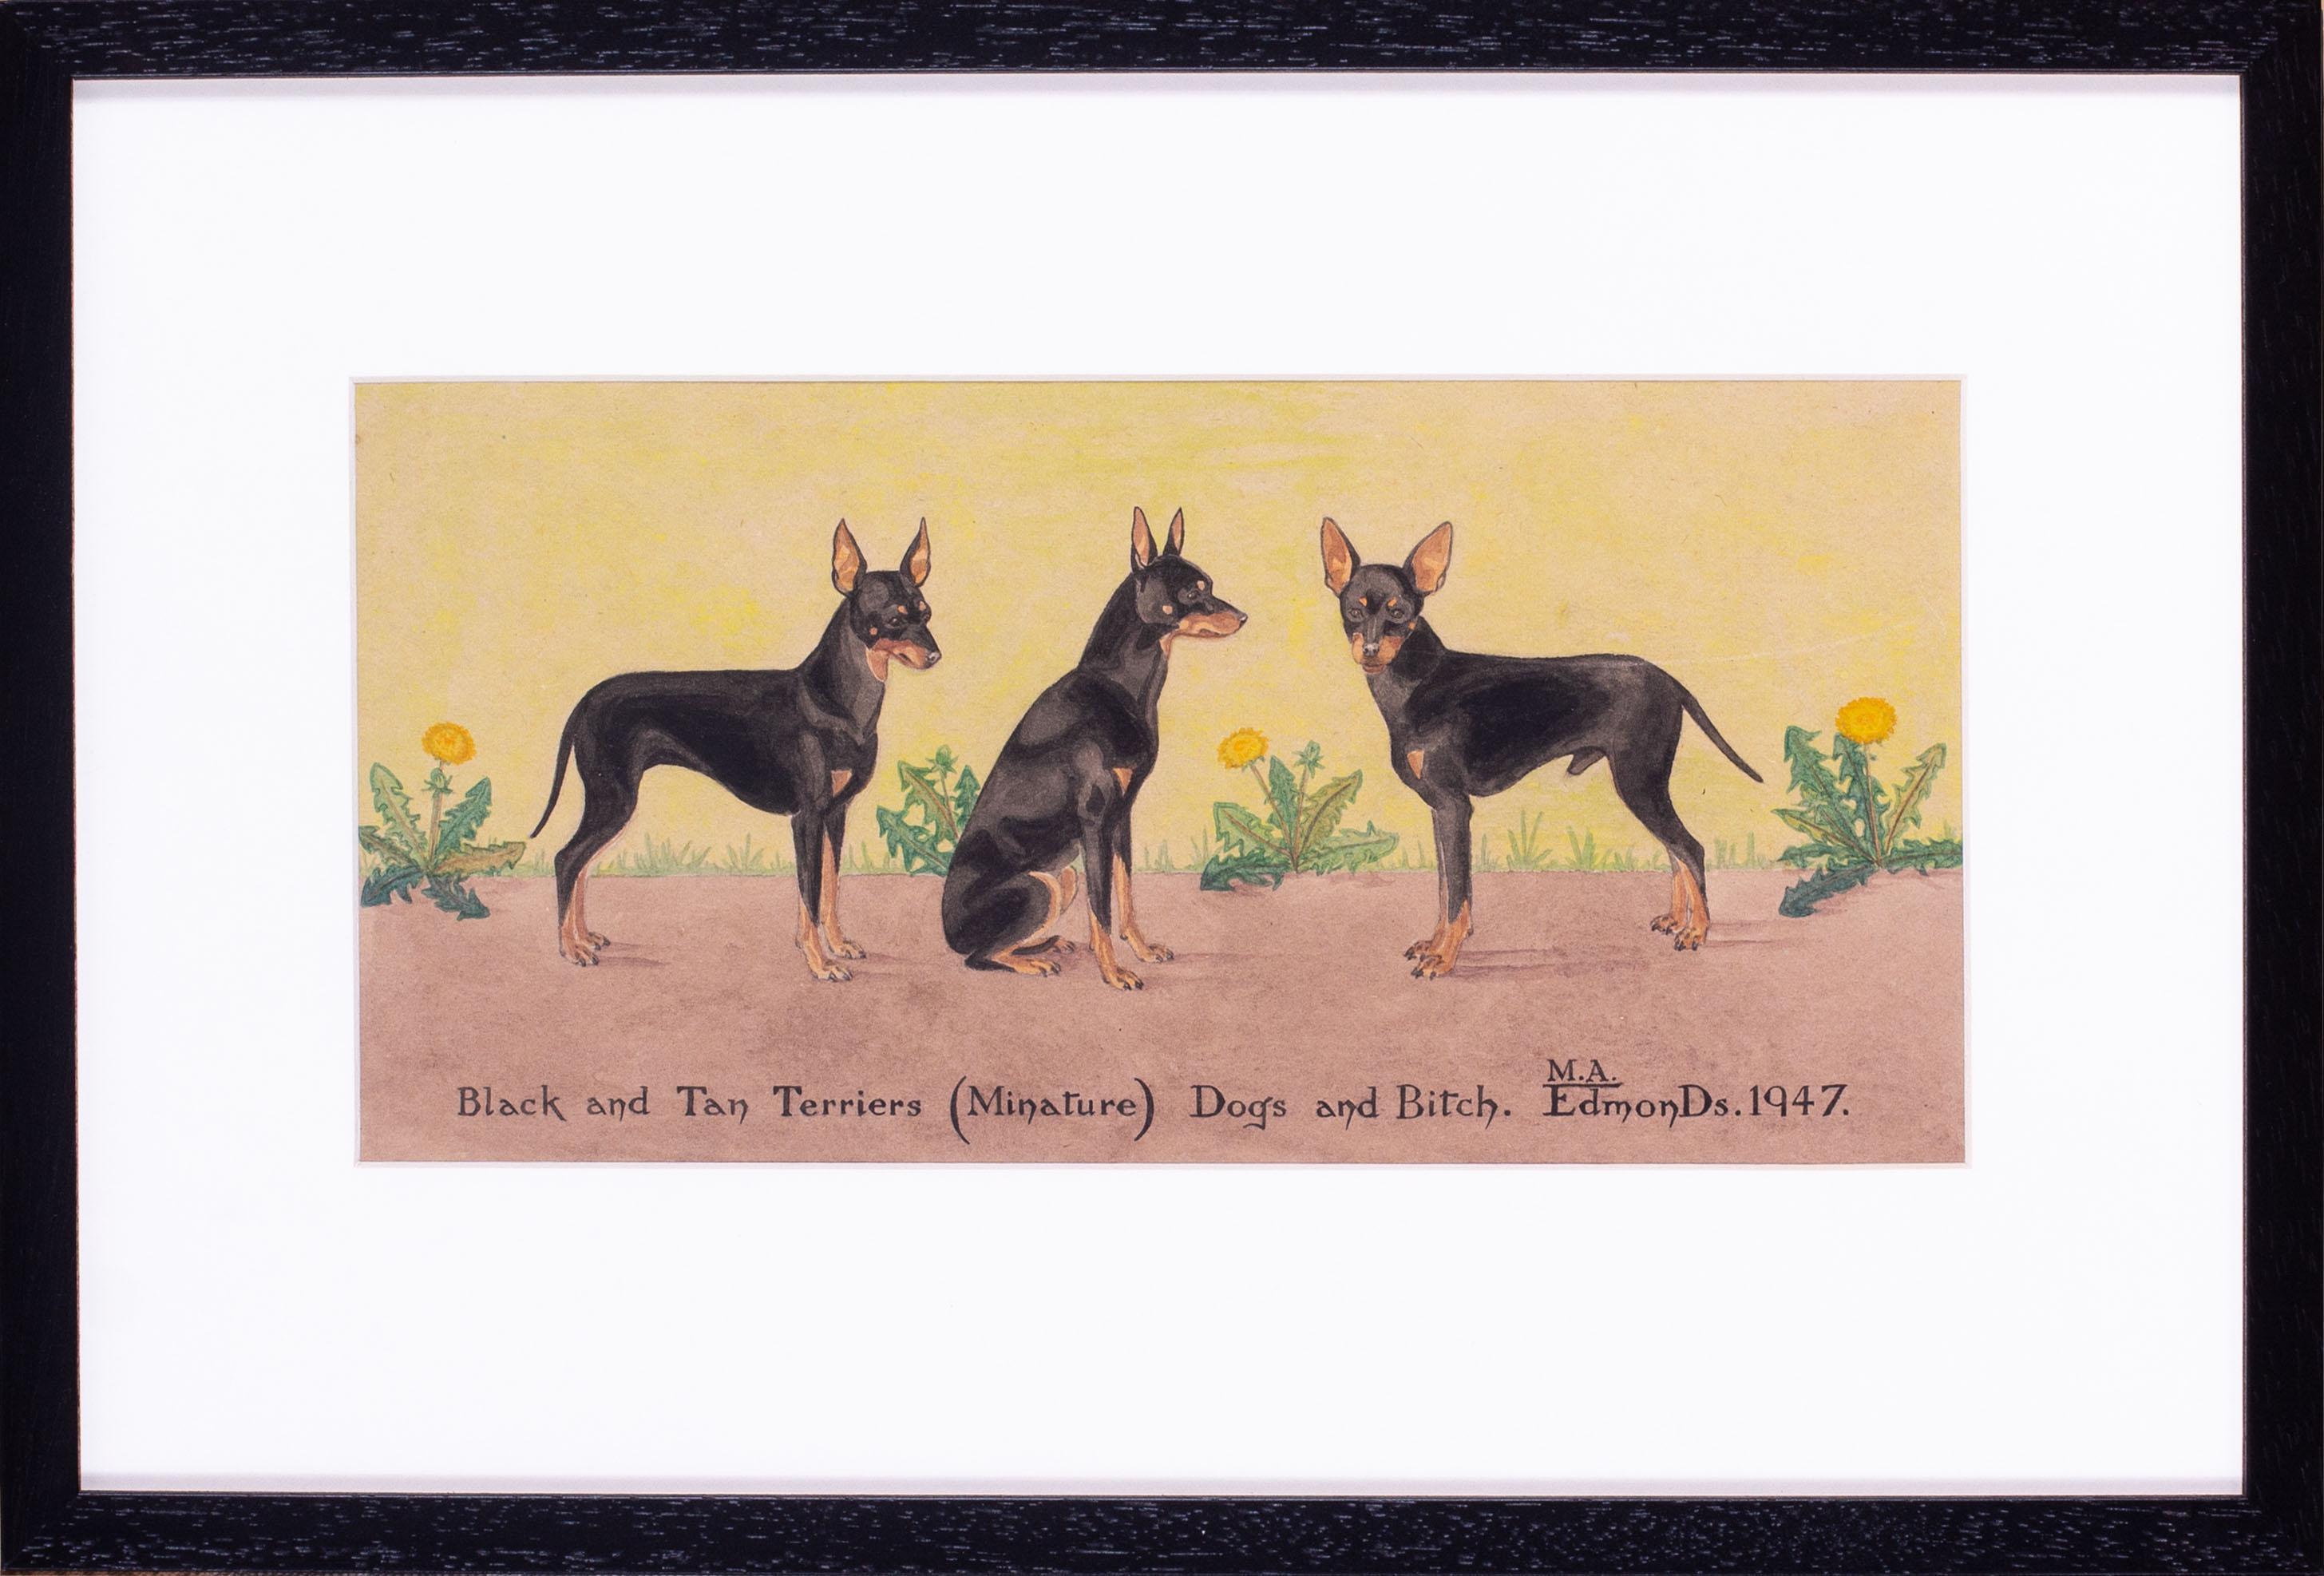 British mid century watercolour and pen drawing of black and tan terrier dogs